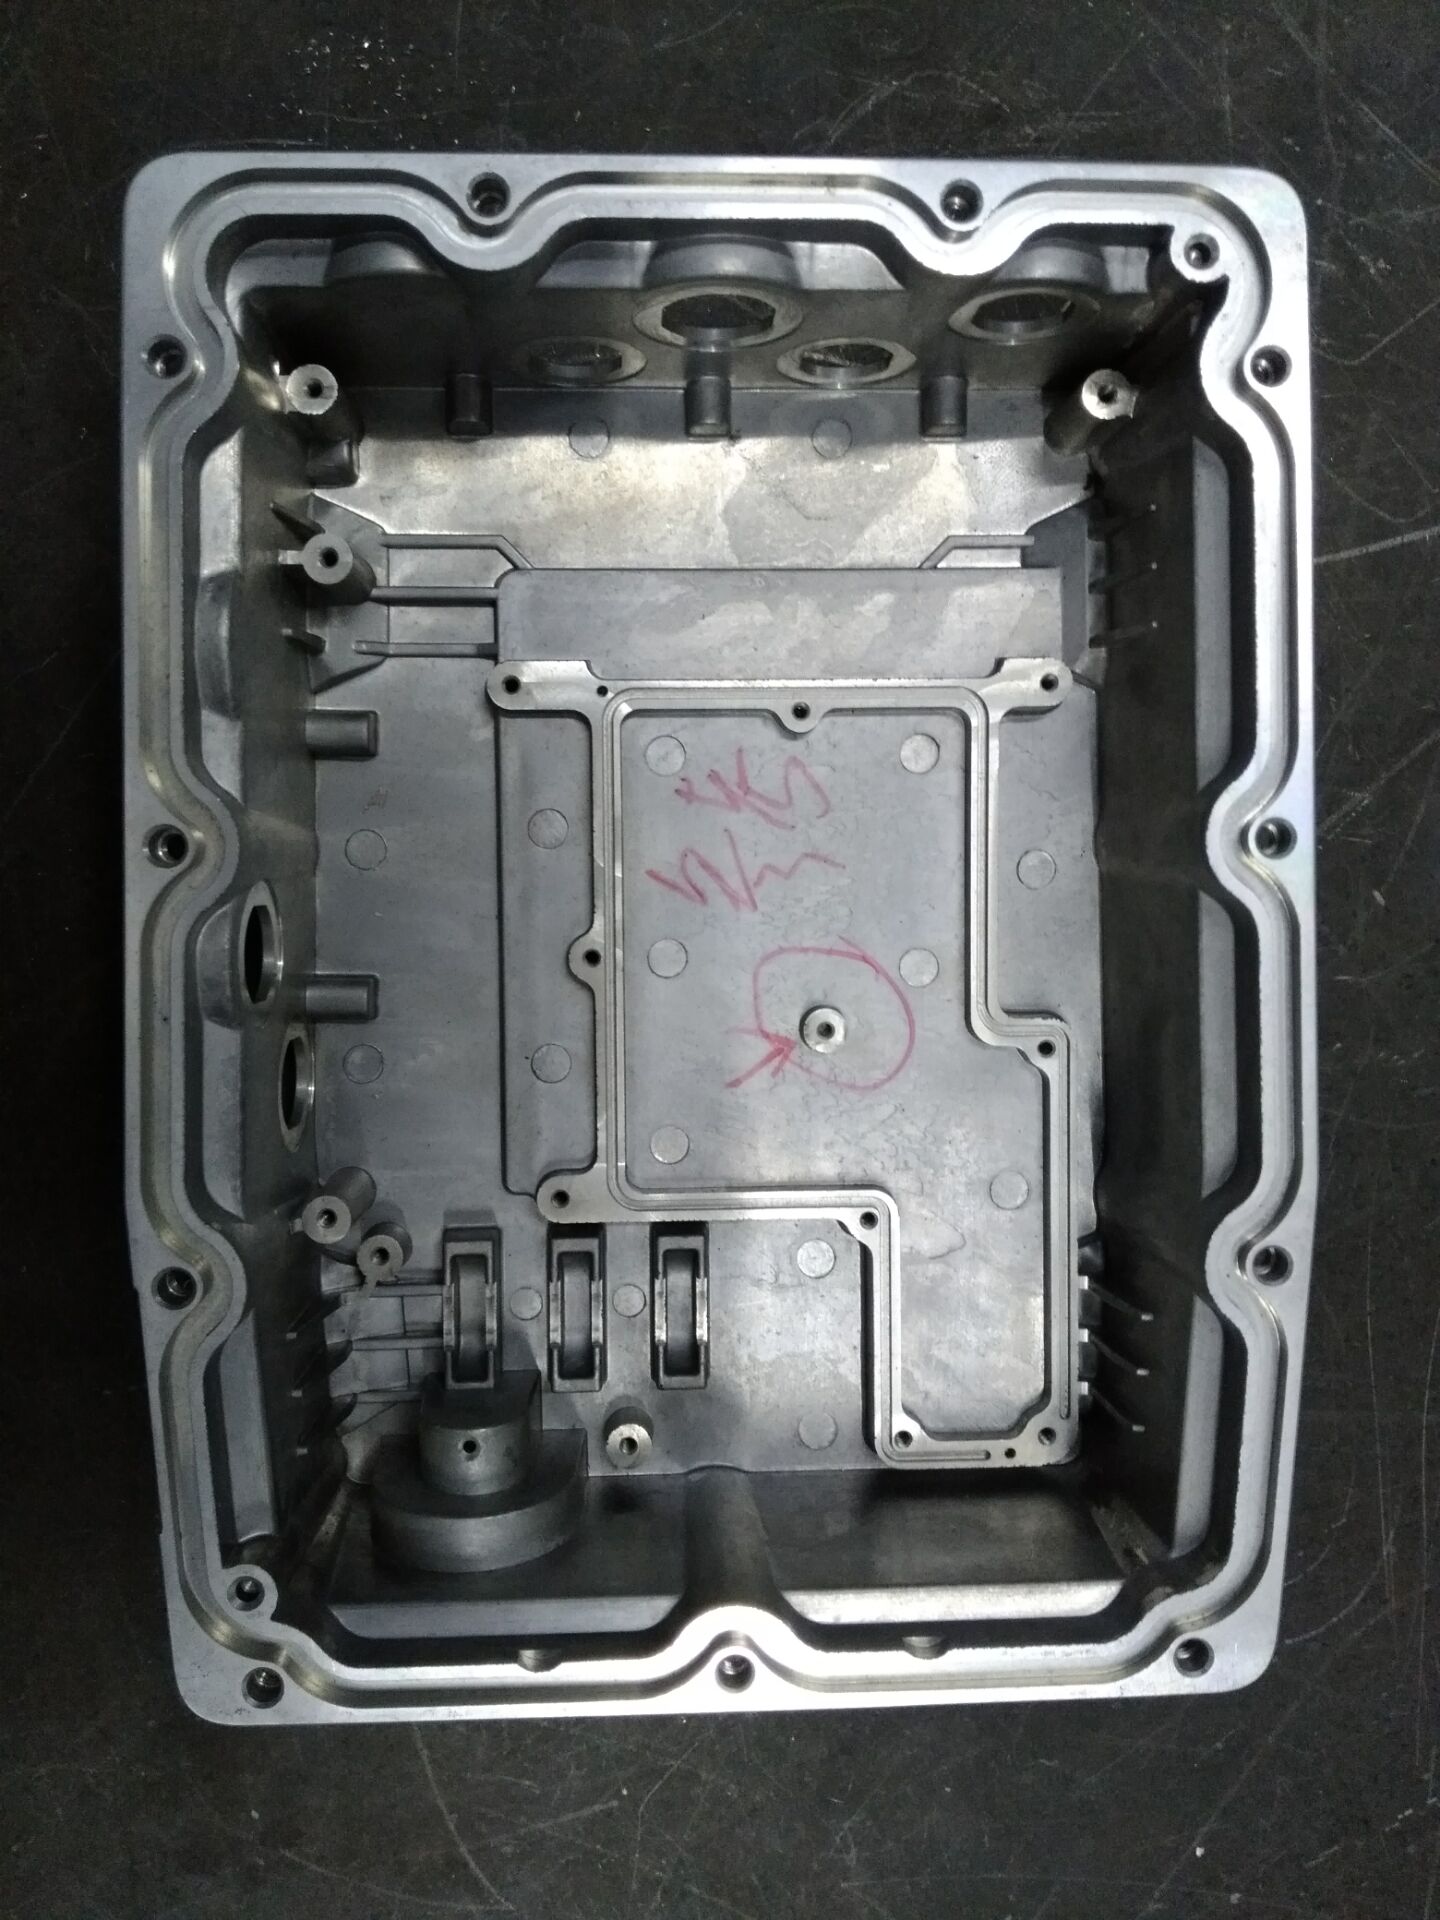 How can plastic mould corner factory address potential design defects?